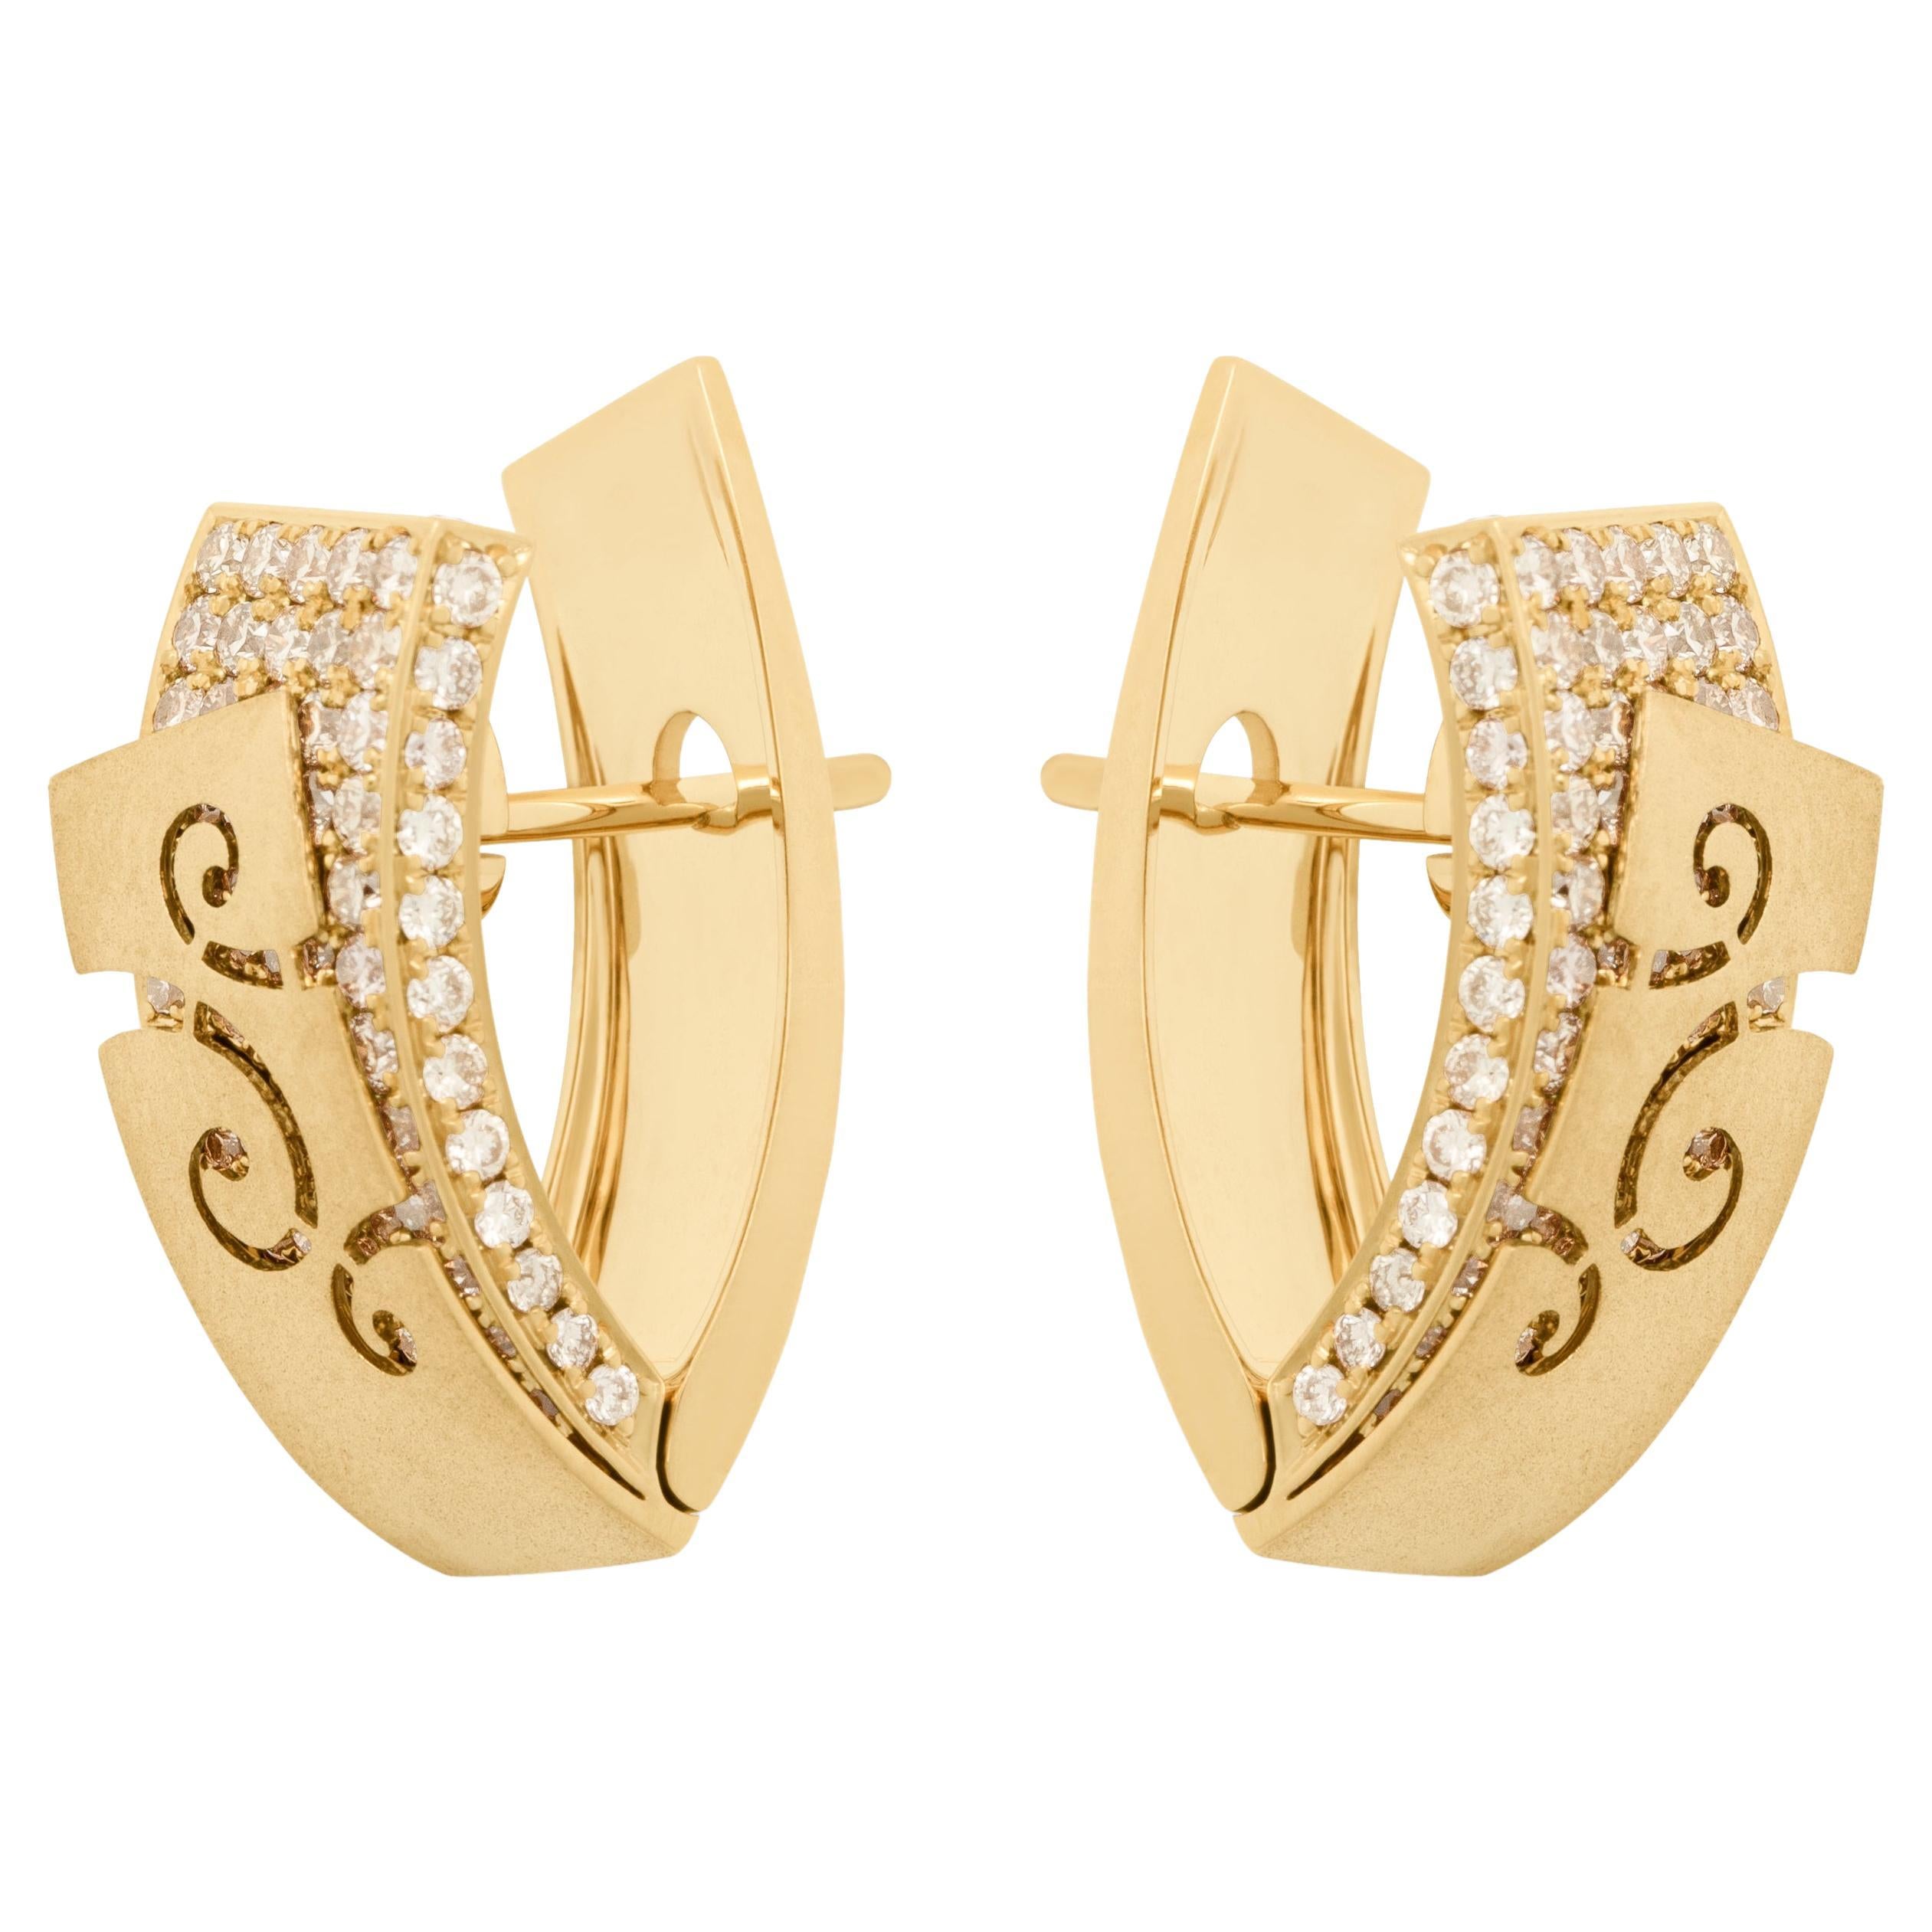 Champagne Diamonds 18 Karat Yellow Gold Veil Earrings

Veil inspired this jewelry series by our designers. For example, these Earrings seem to have two layers. The first layer is a 